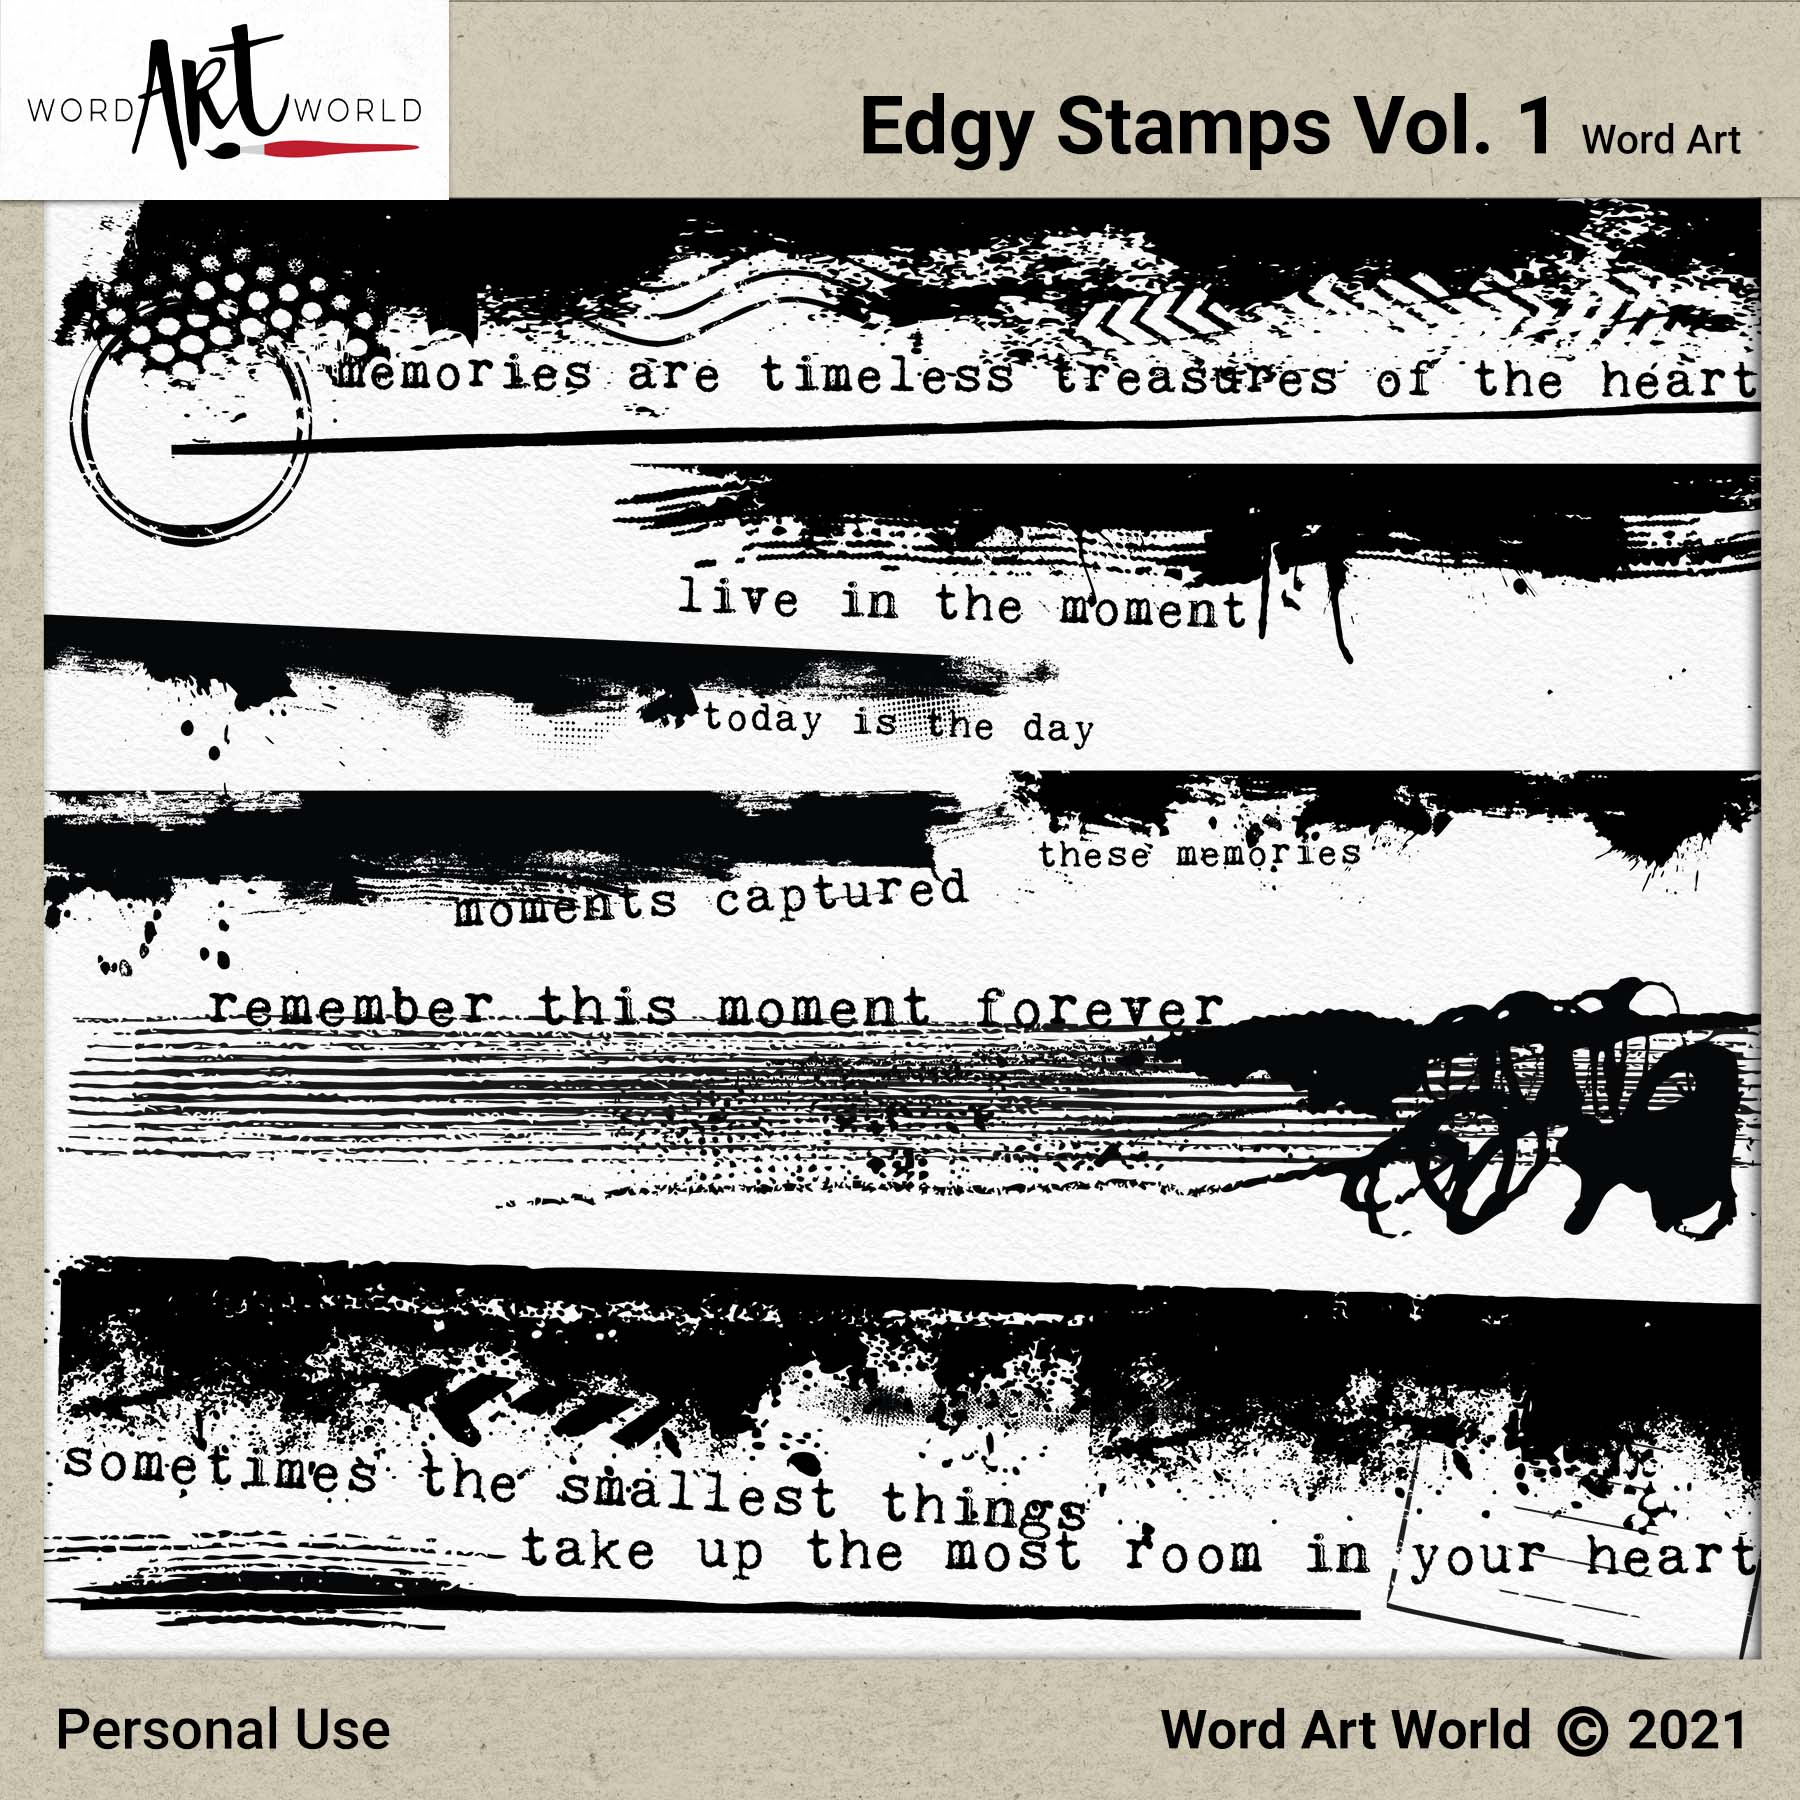 Edgy Stamps Vol. 1 Word Art